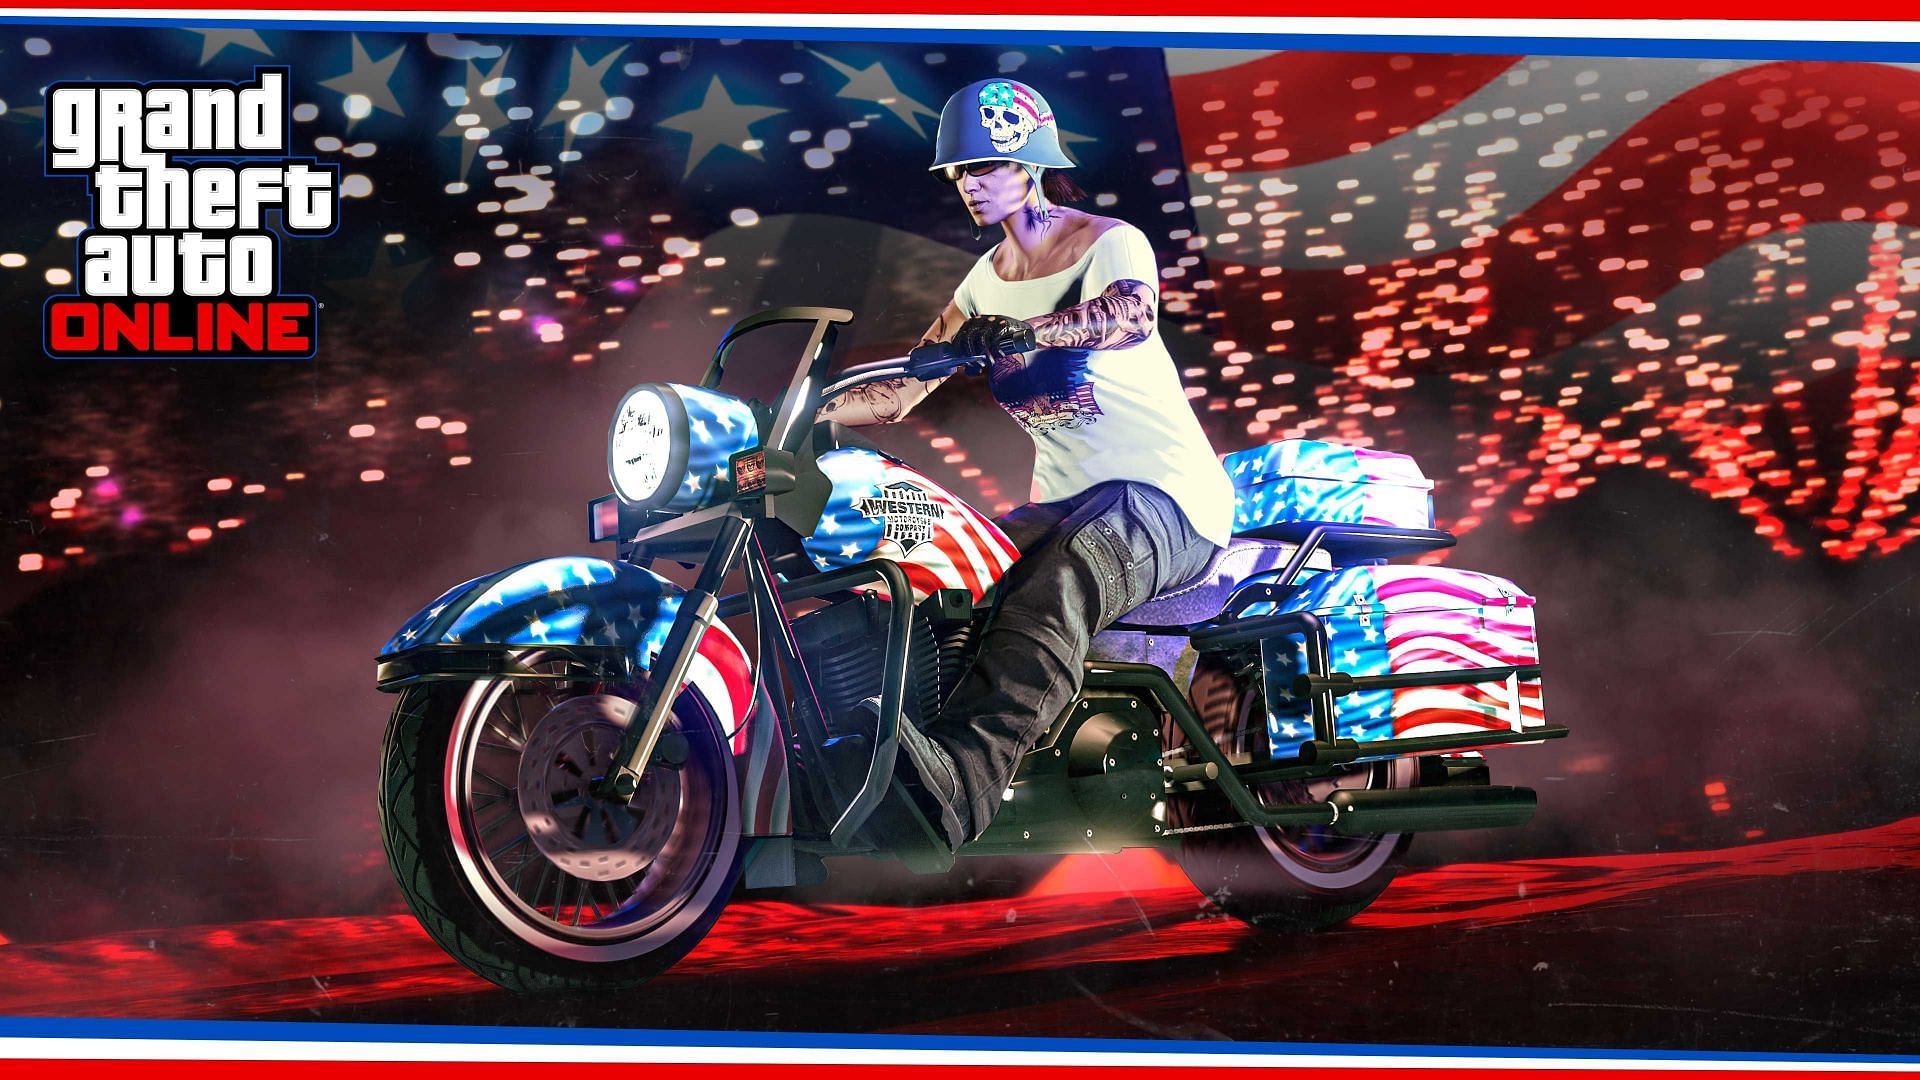 A brief report on the Independence Day celebration event in GTA Online where Rockstar is giving a free vehicle and huge bonuses this week (Image via Rockstar Games)